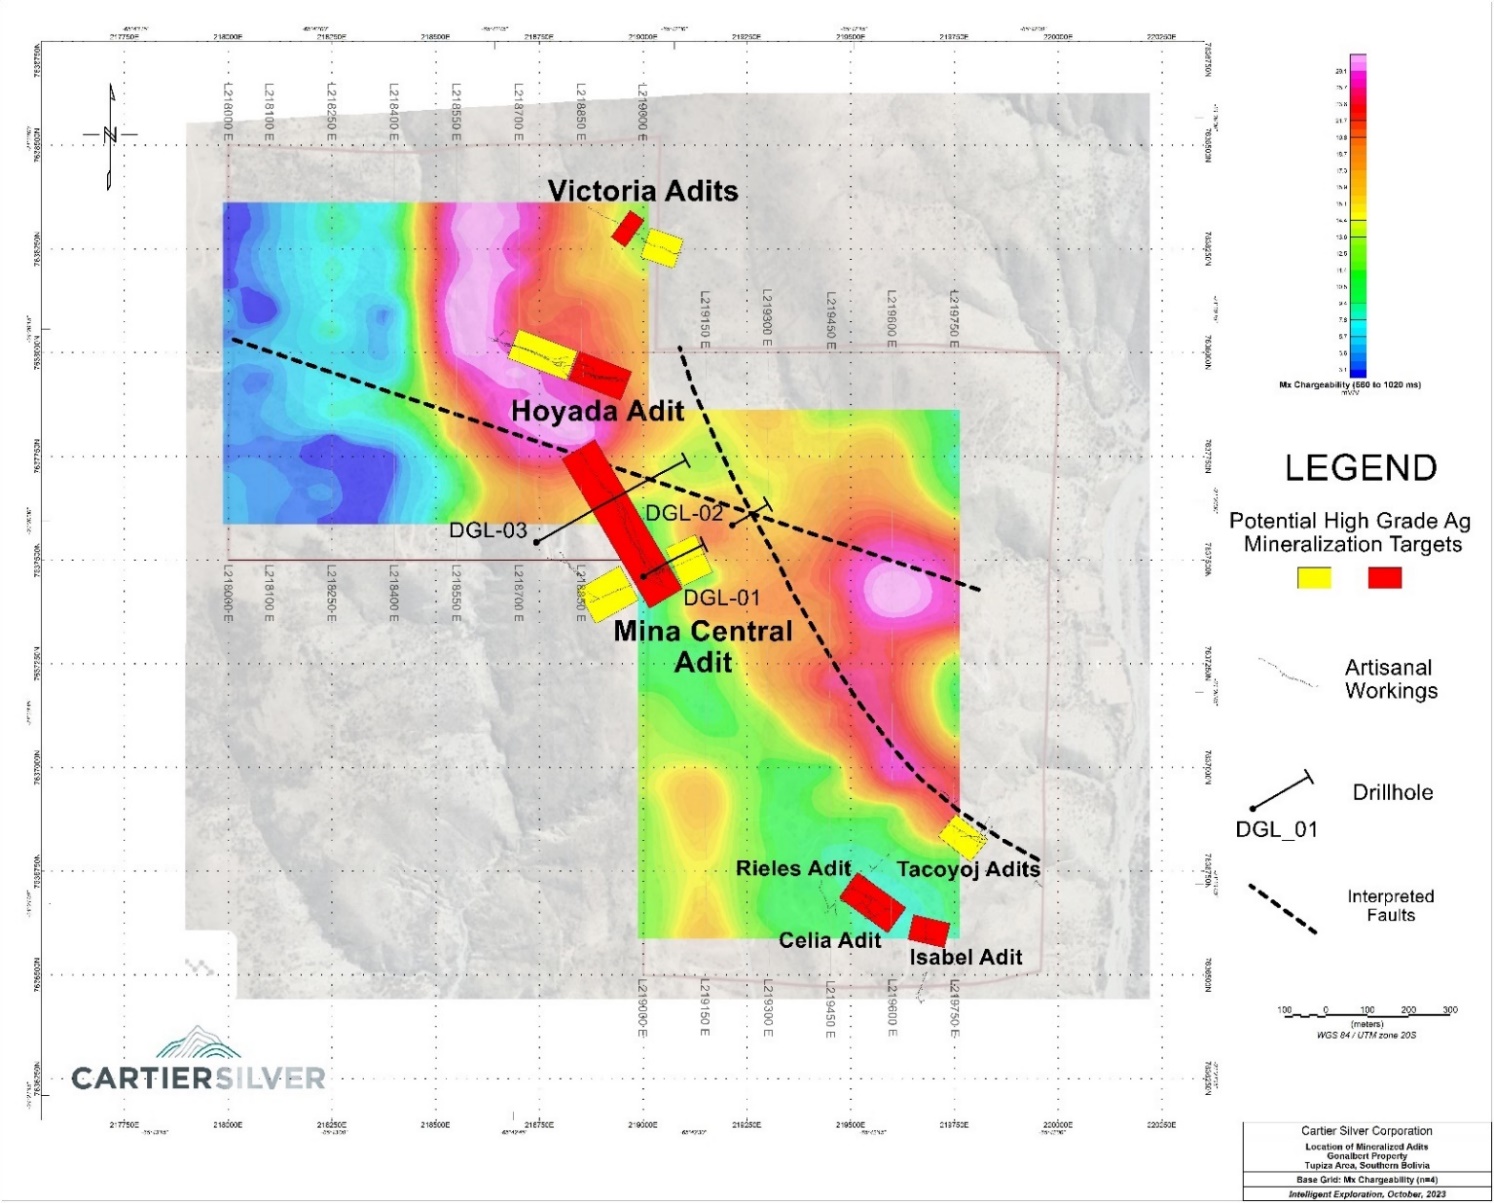 Plan Map with Drill Holes Completed Showing Model Chargeability and Correlation of Chargeability with Potential High Grade Silver Target Areas outlined by Underground Channel Sampling